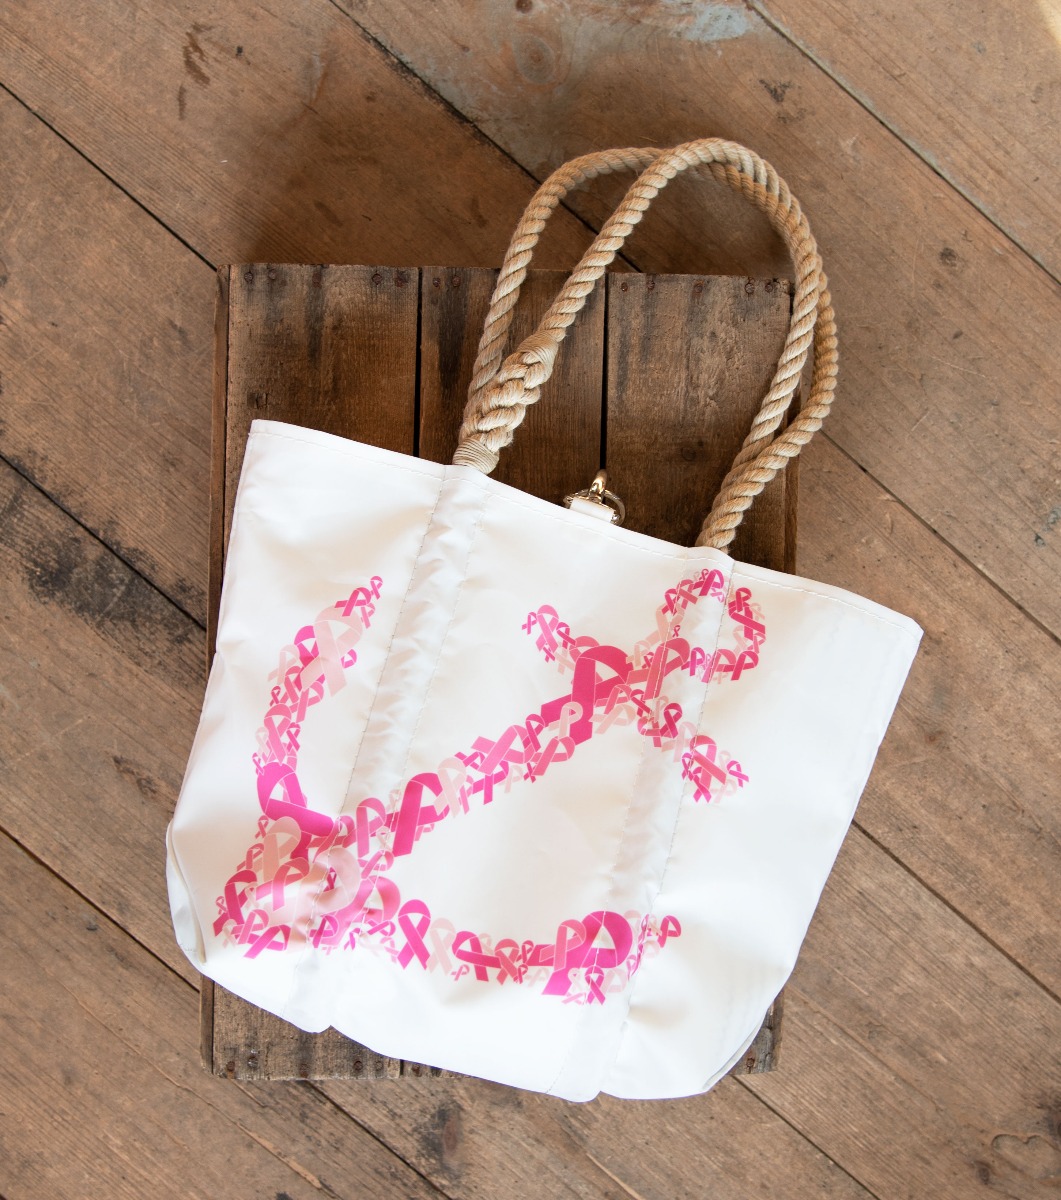 Recycled sail cloth bag with anchor made of breast cancer ribbons